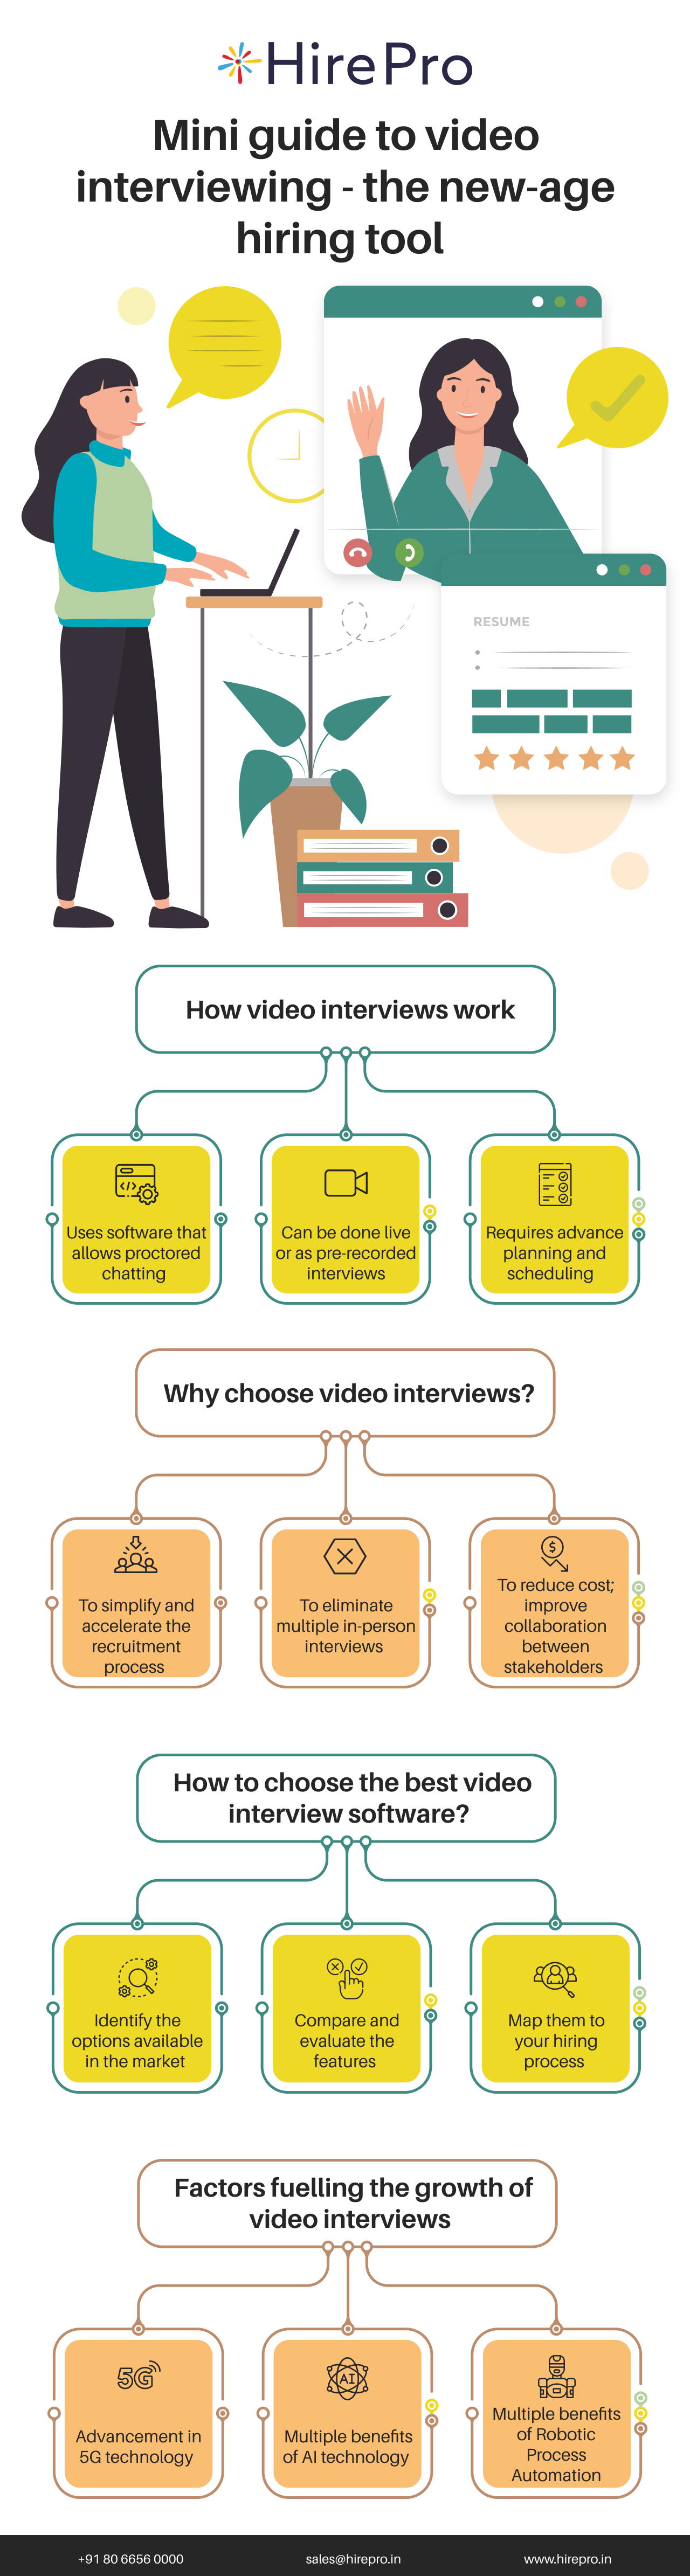 Mini guide to video interviewing - the new-age hiring tool